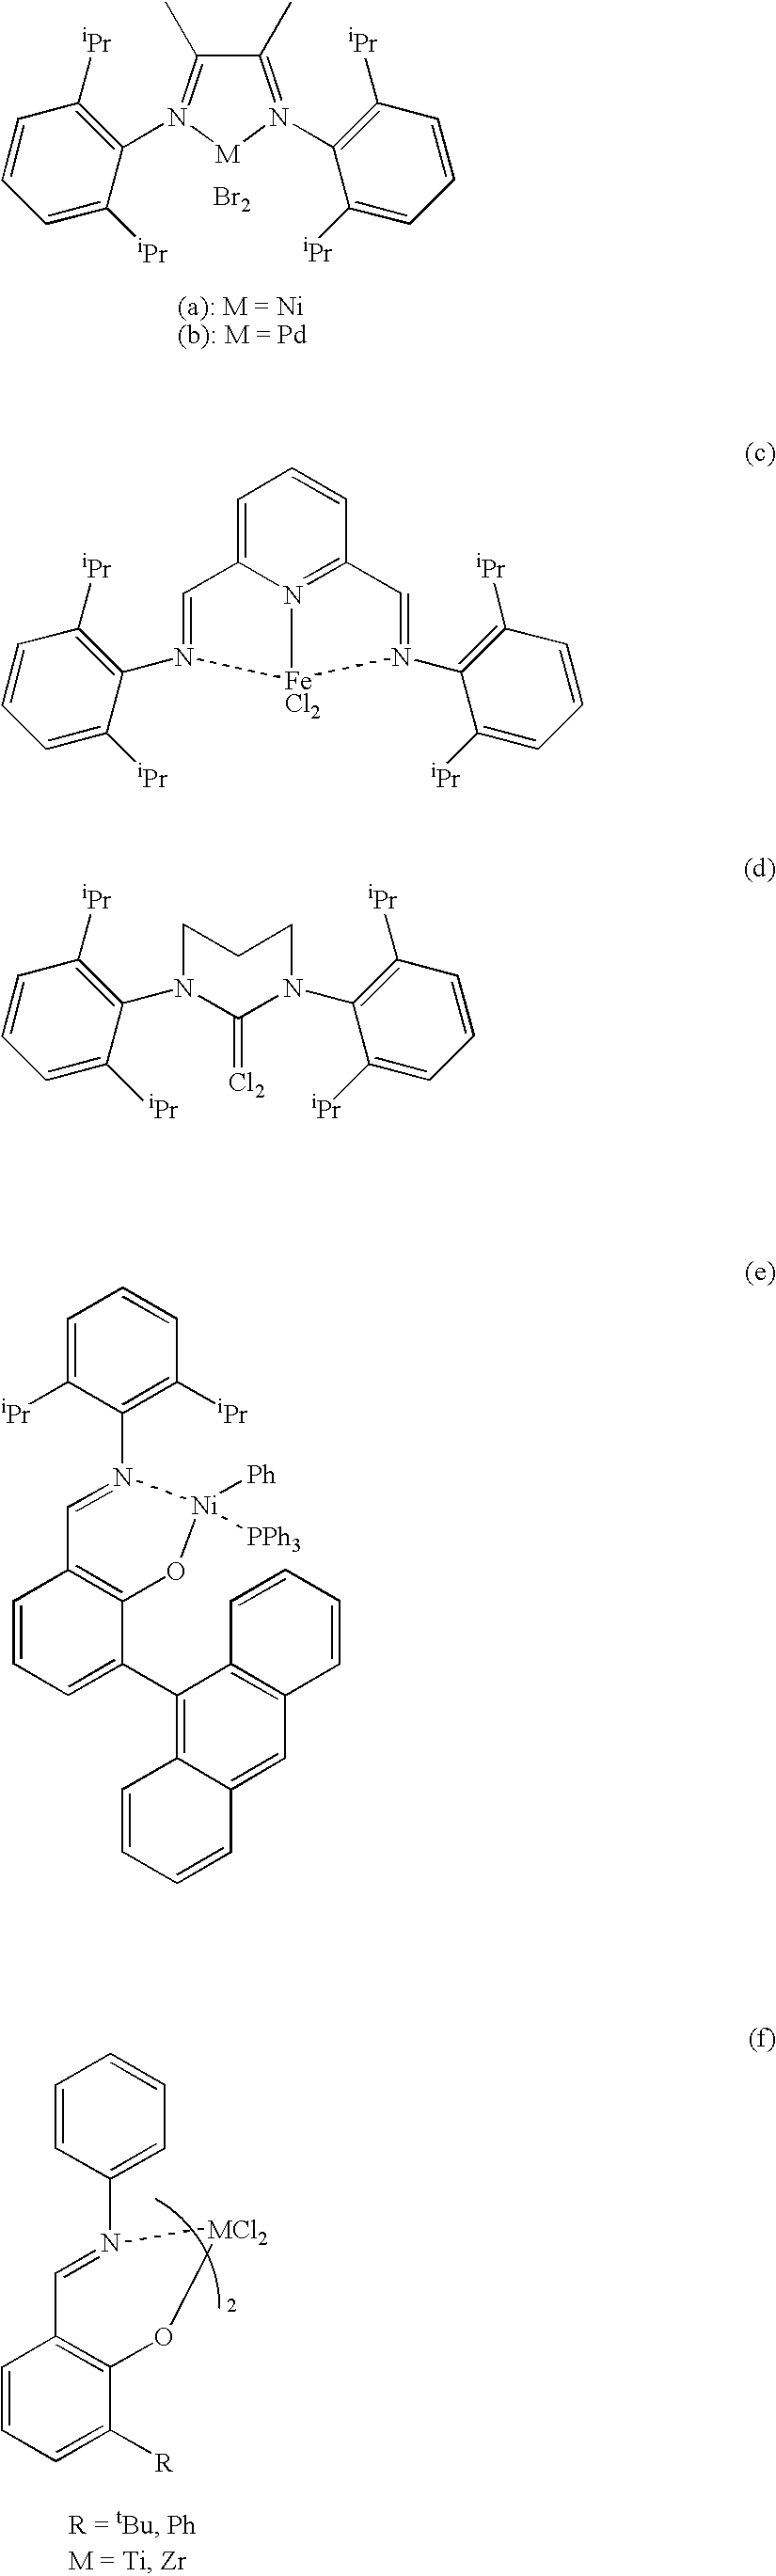 Catalyst for polymerization or copolymerization of olefins, preparation and use of the same